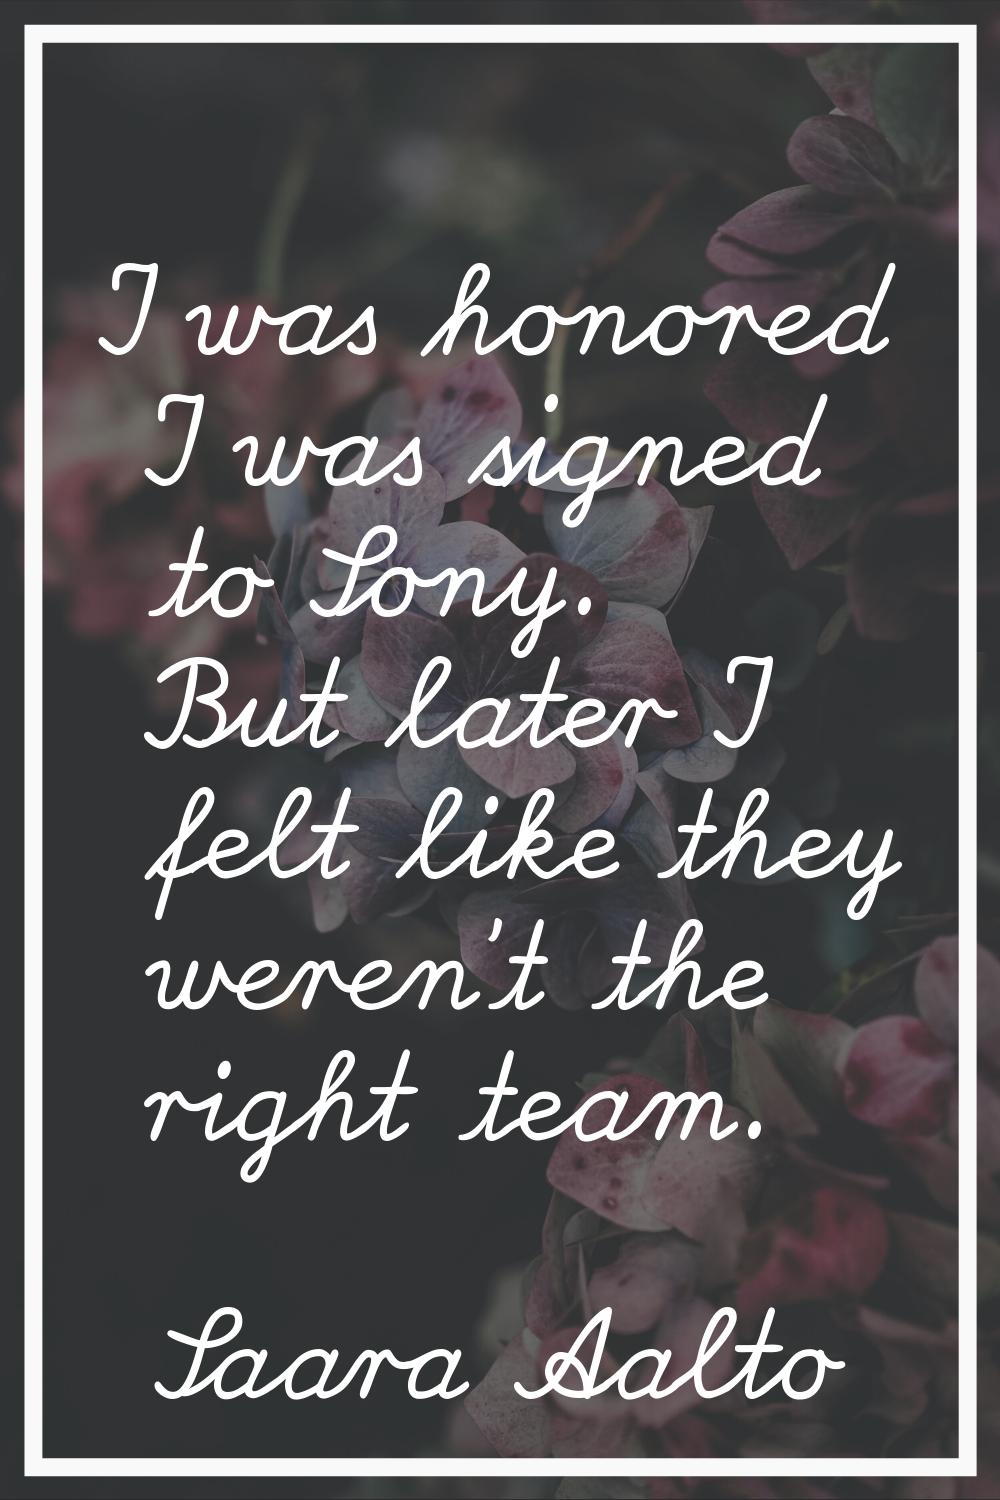 I was honored I was signed to Sony. But later I felt like they weren't the right team.